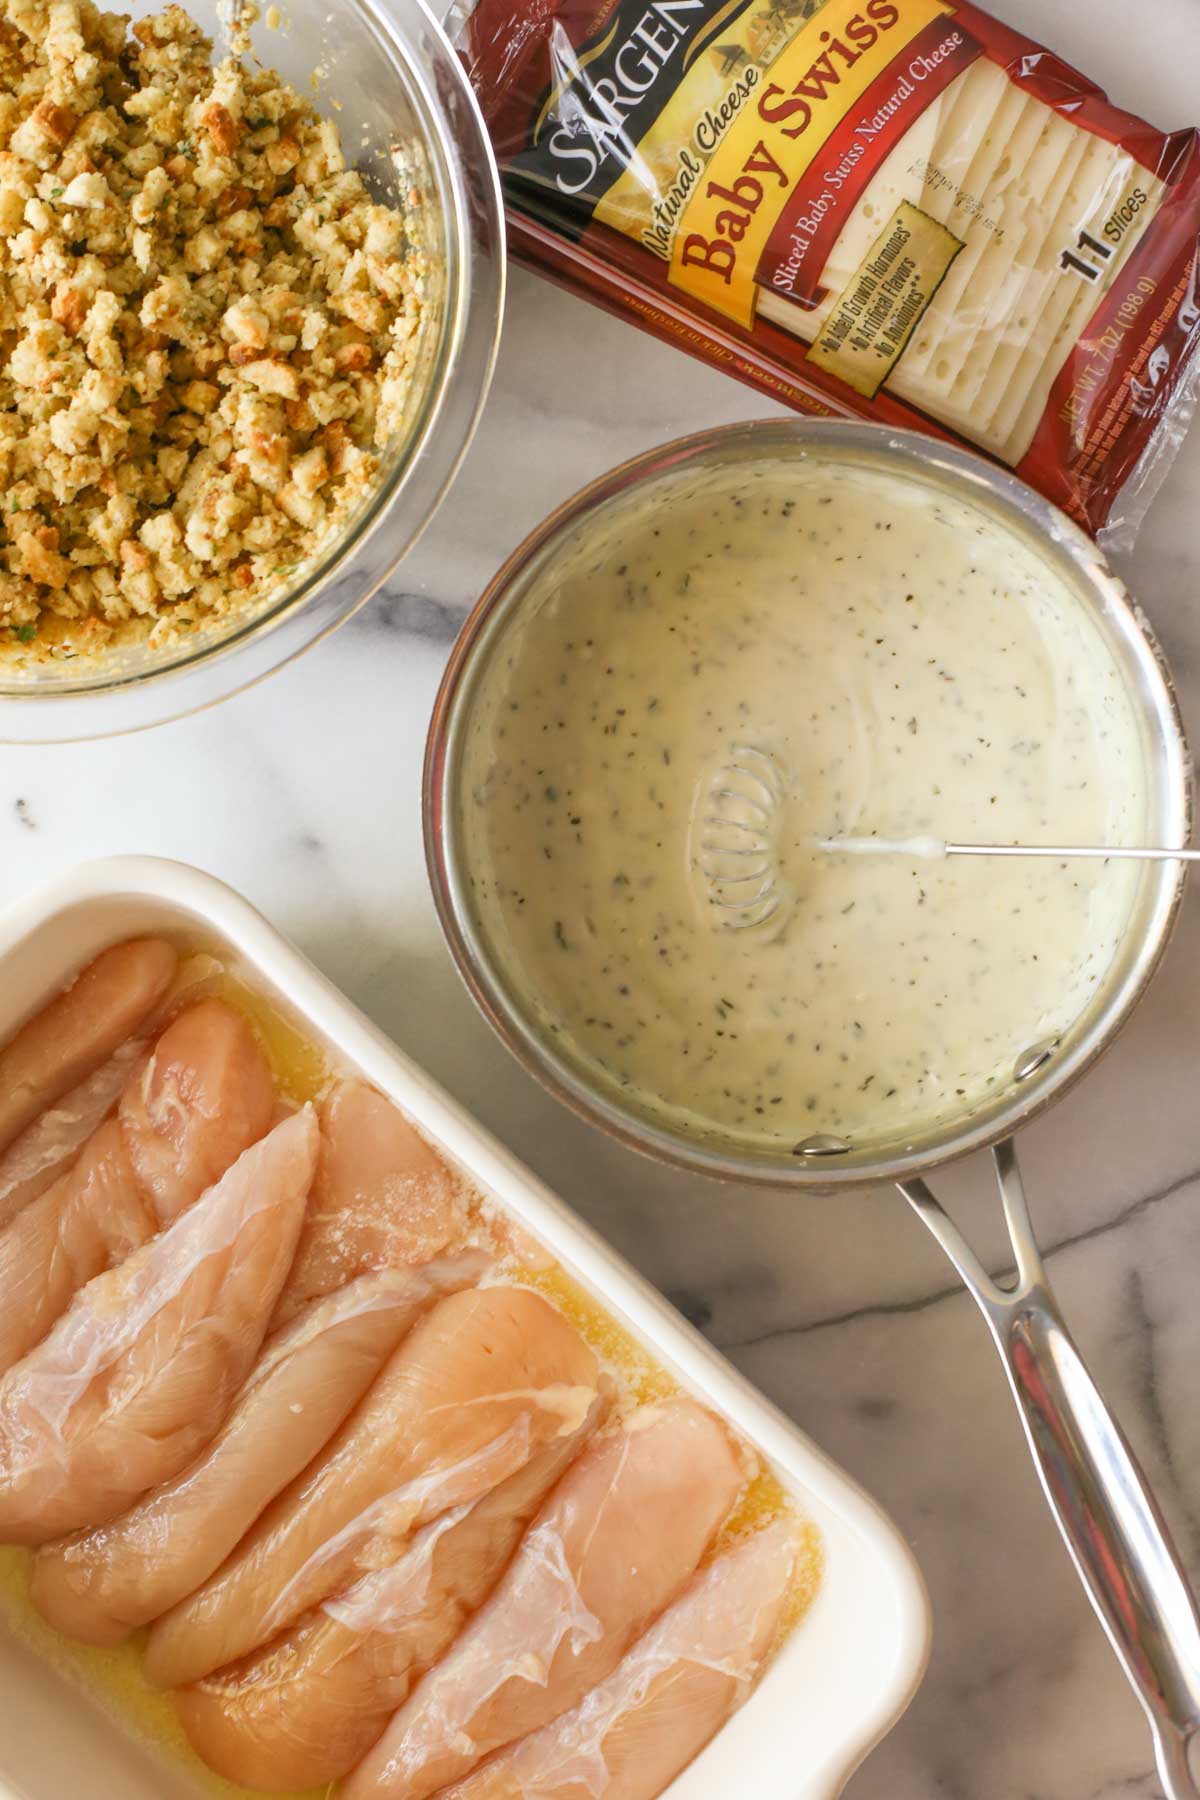 Overhead shot of a sauce pan of Homemade Cream of Chicken Soup, a package of Baby Swiss cheese slices, a mixing bowl of the boxed stuffing, and a baking dish with the melted butter and chicken tenderloins. 